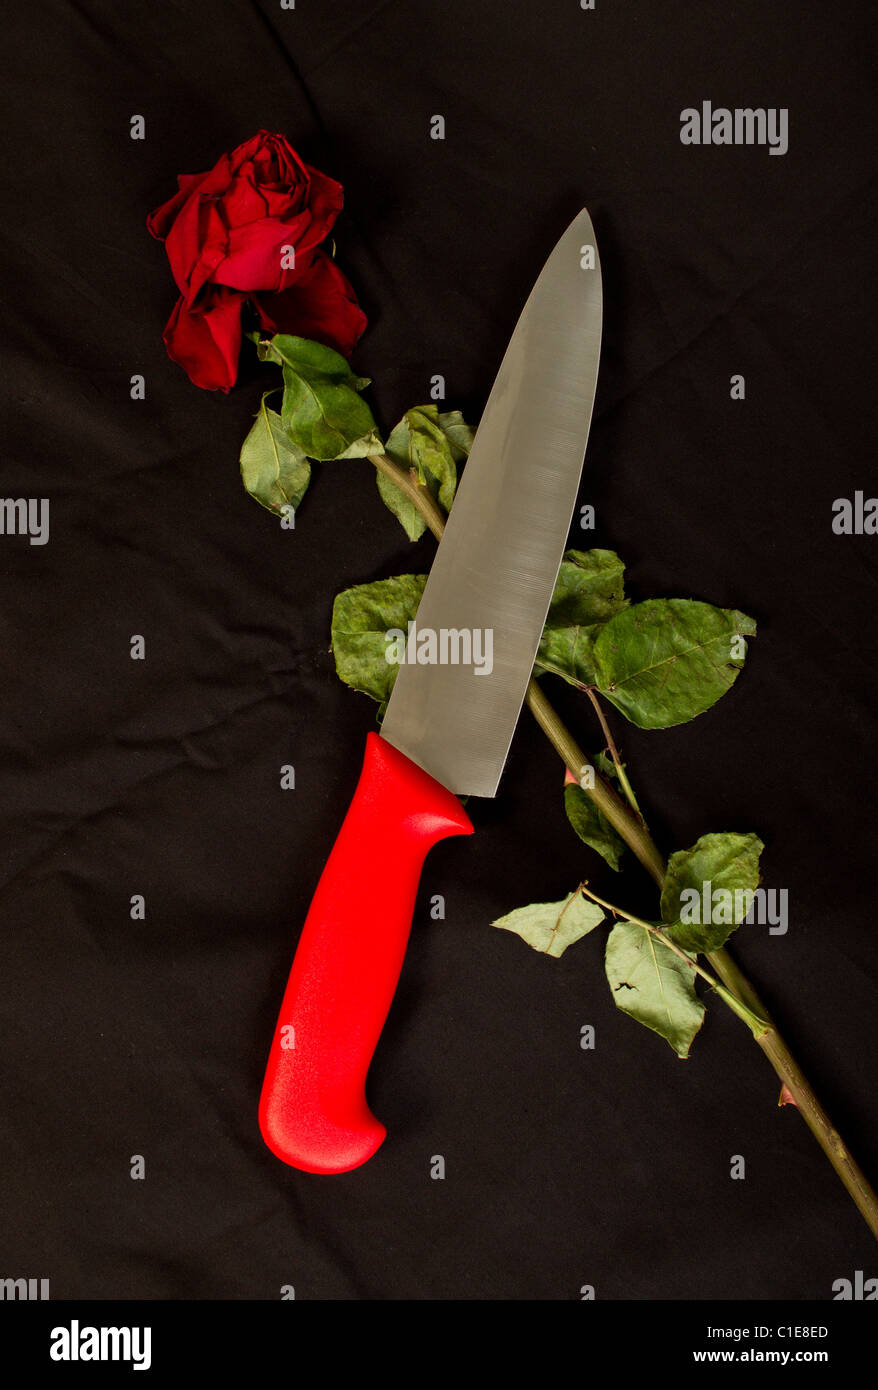 Big kitchen knife and almost withered red rose Stock Photo